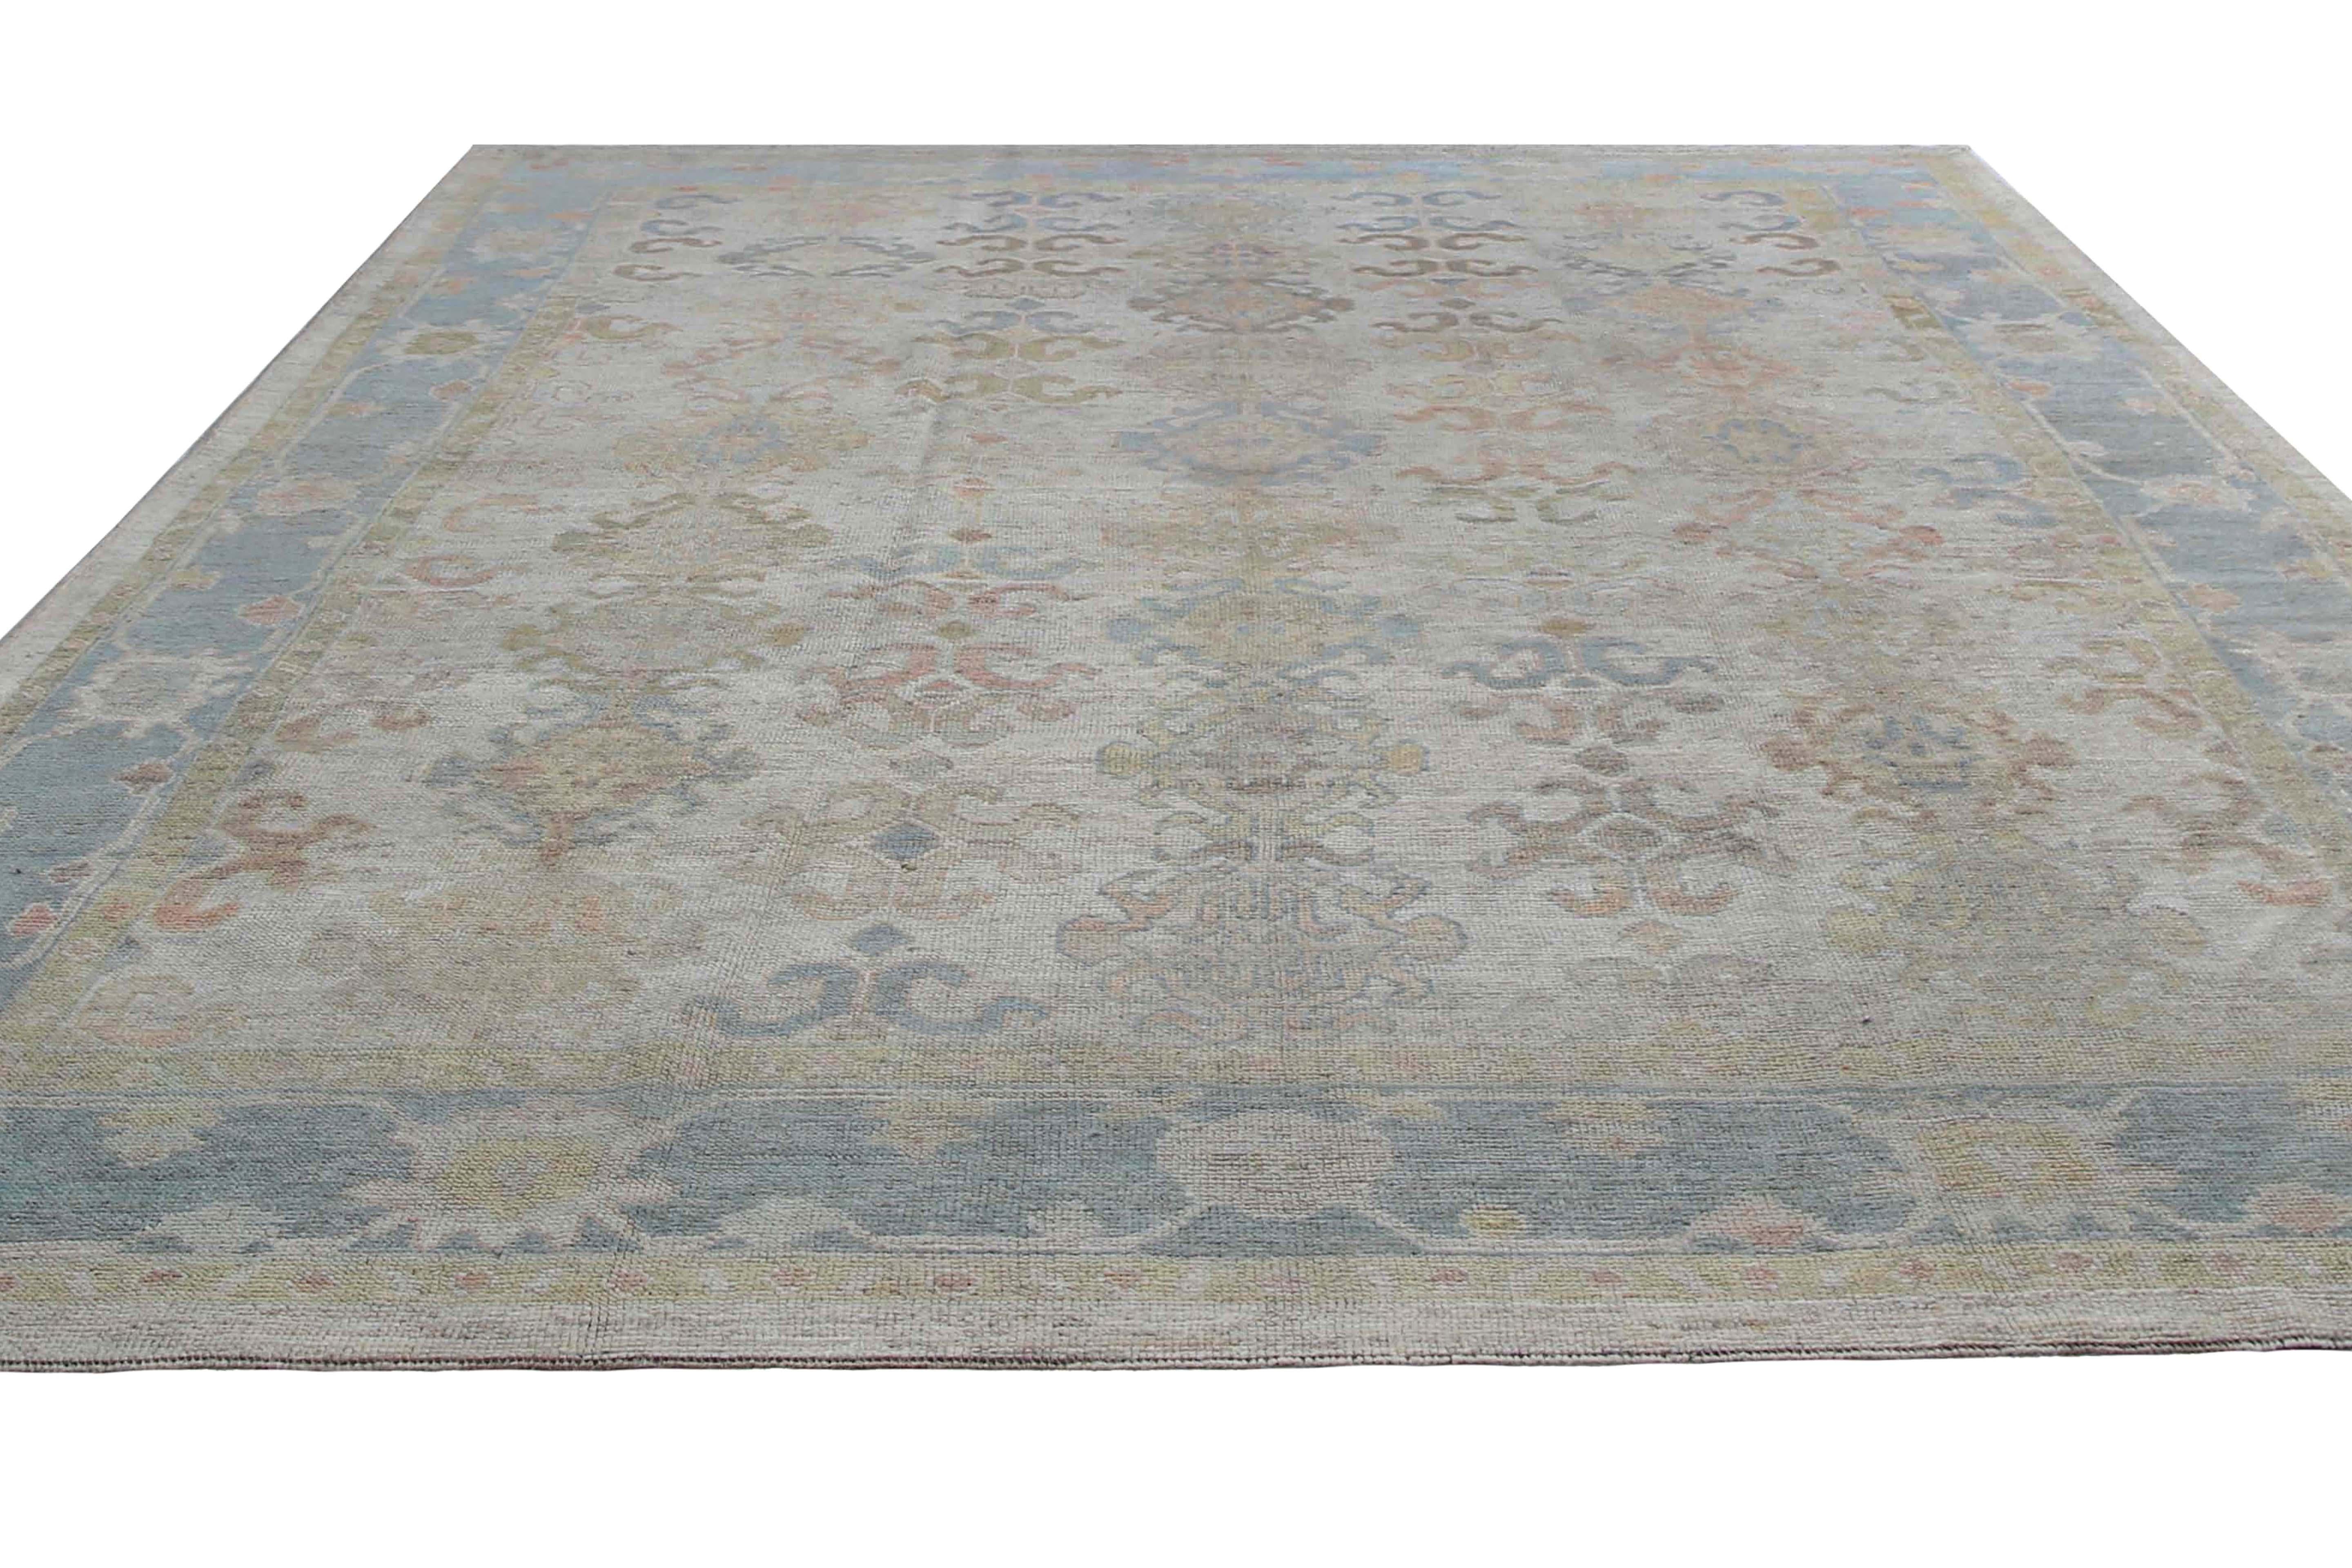 Introducing our stunning Turkish Oushak rug, measuring 10'2'' by 14'0''. This exquisite rug boasts a light beige background with eye-catching pops of color, including shades of blue, blush, green, and orange. The visible border adds an extra touch